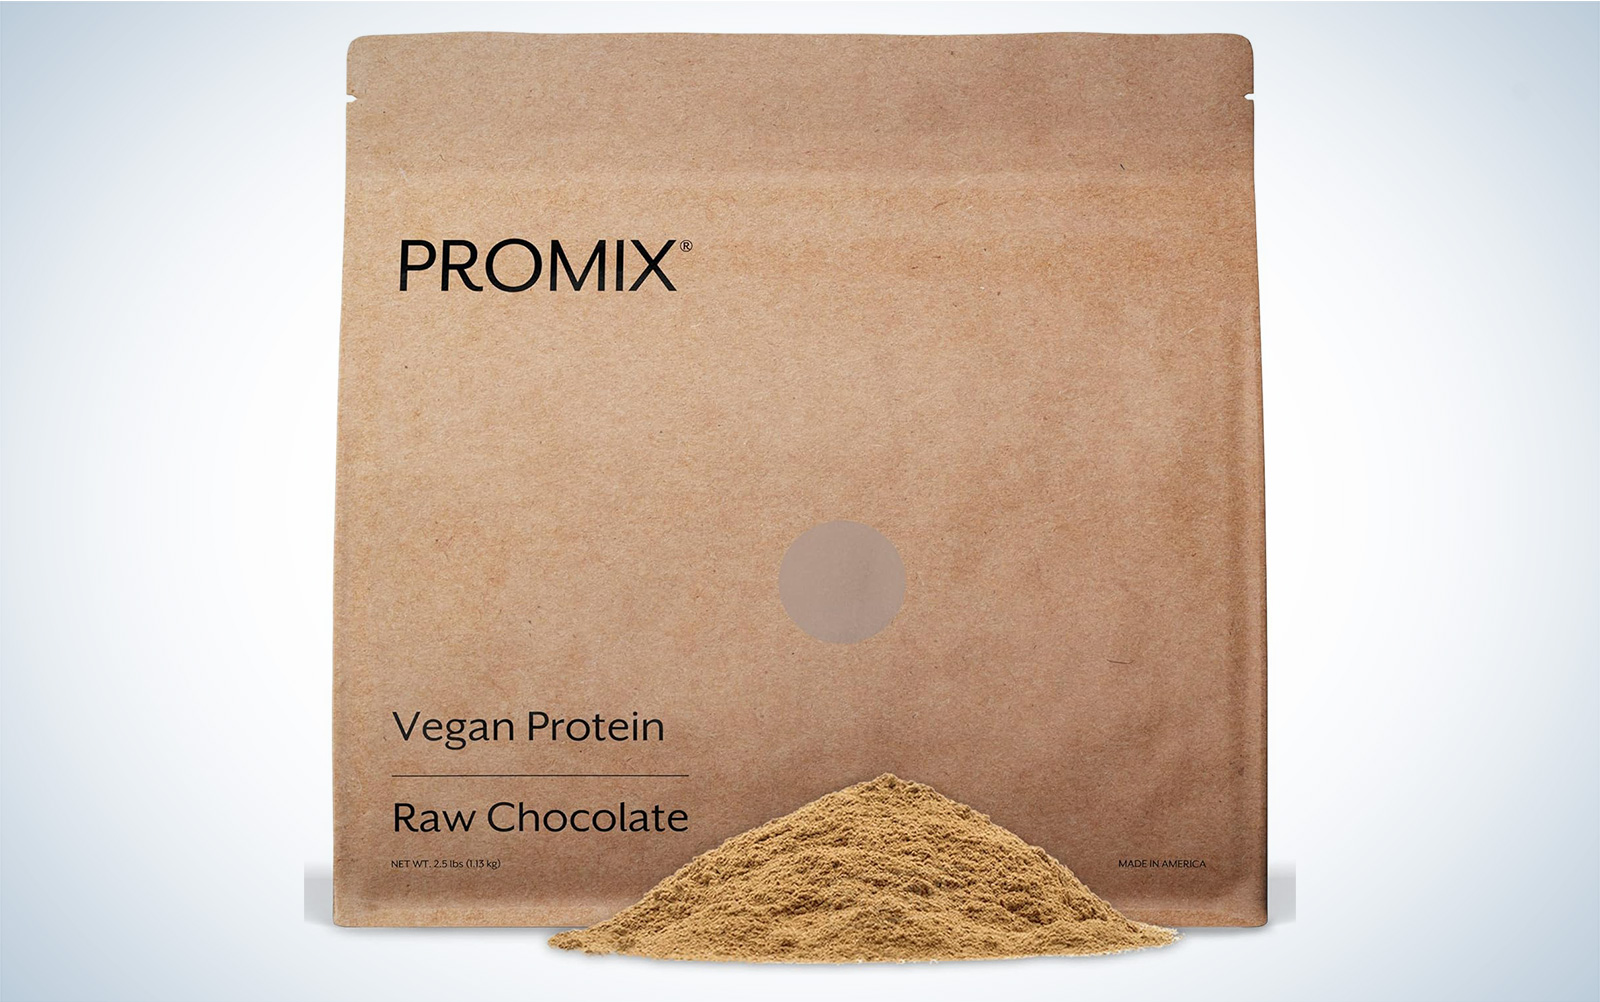 Promix vegan protein with a pile of powder